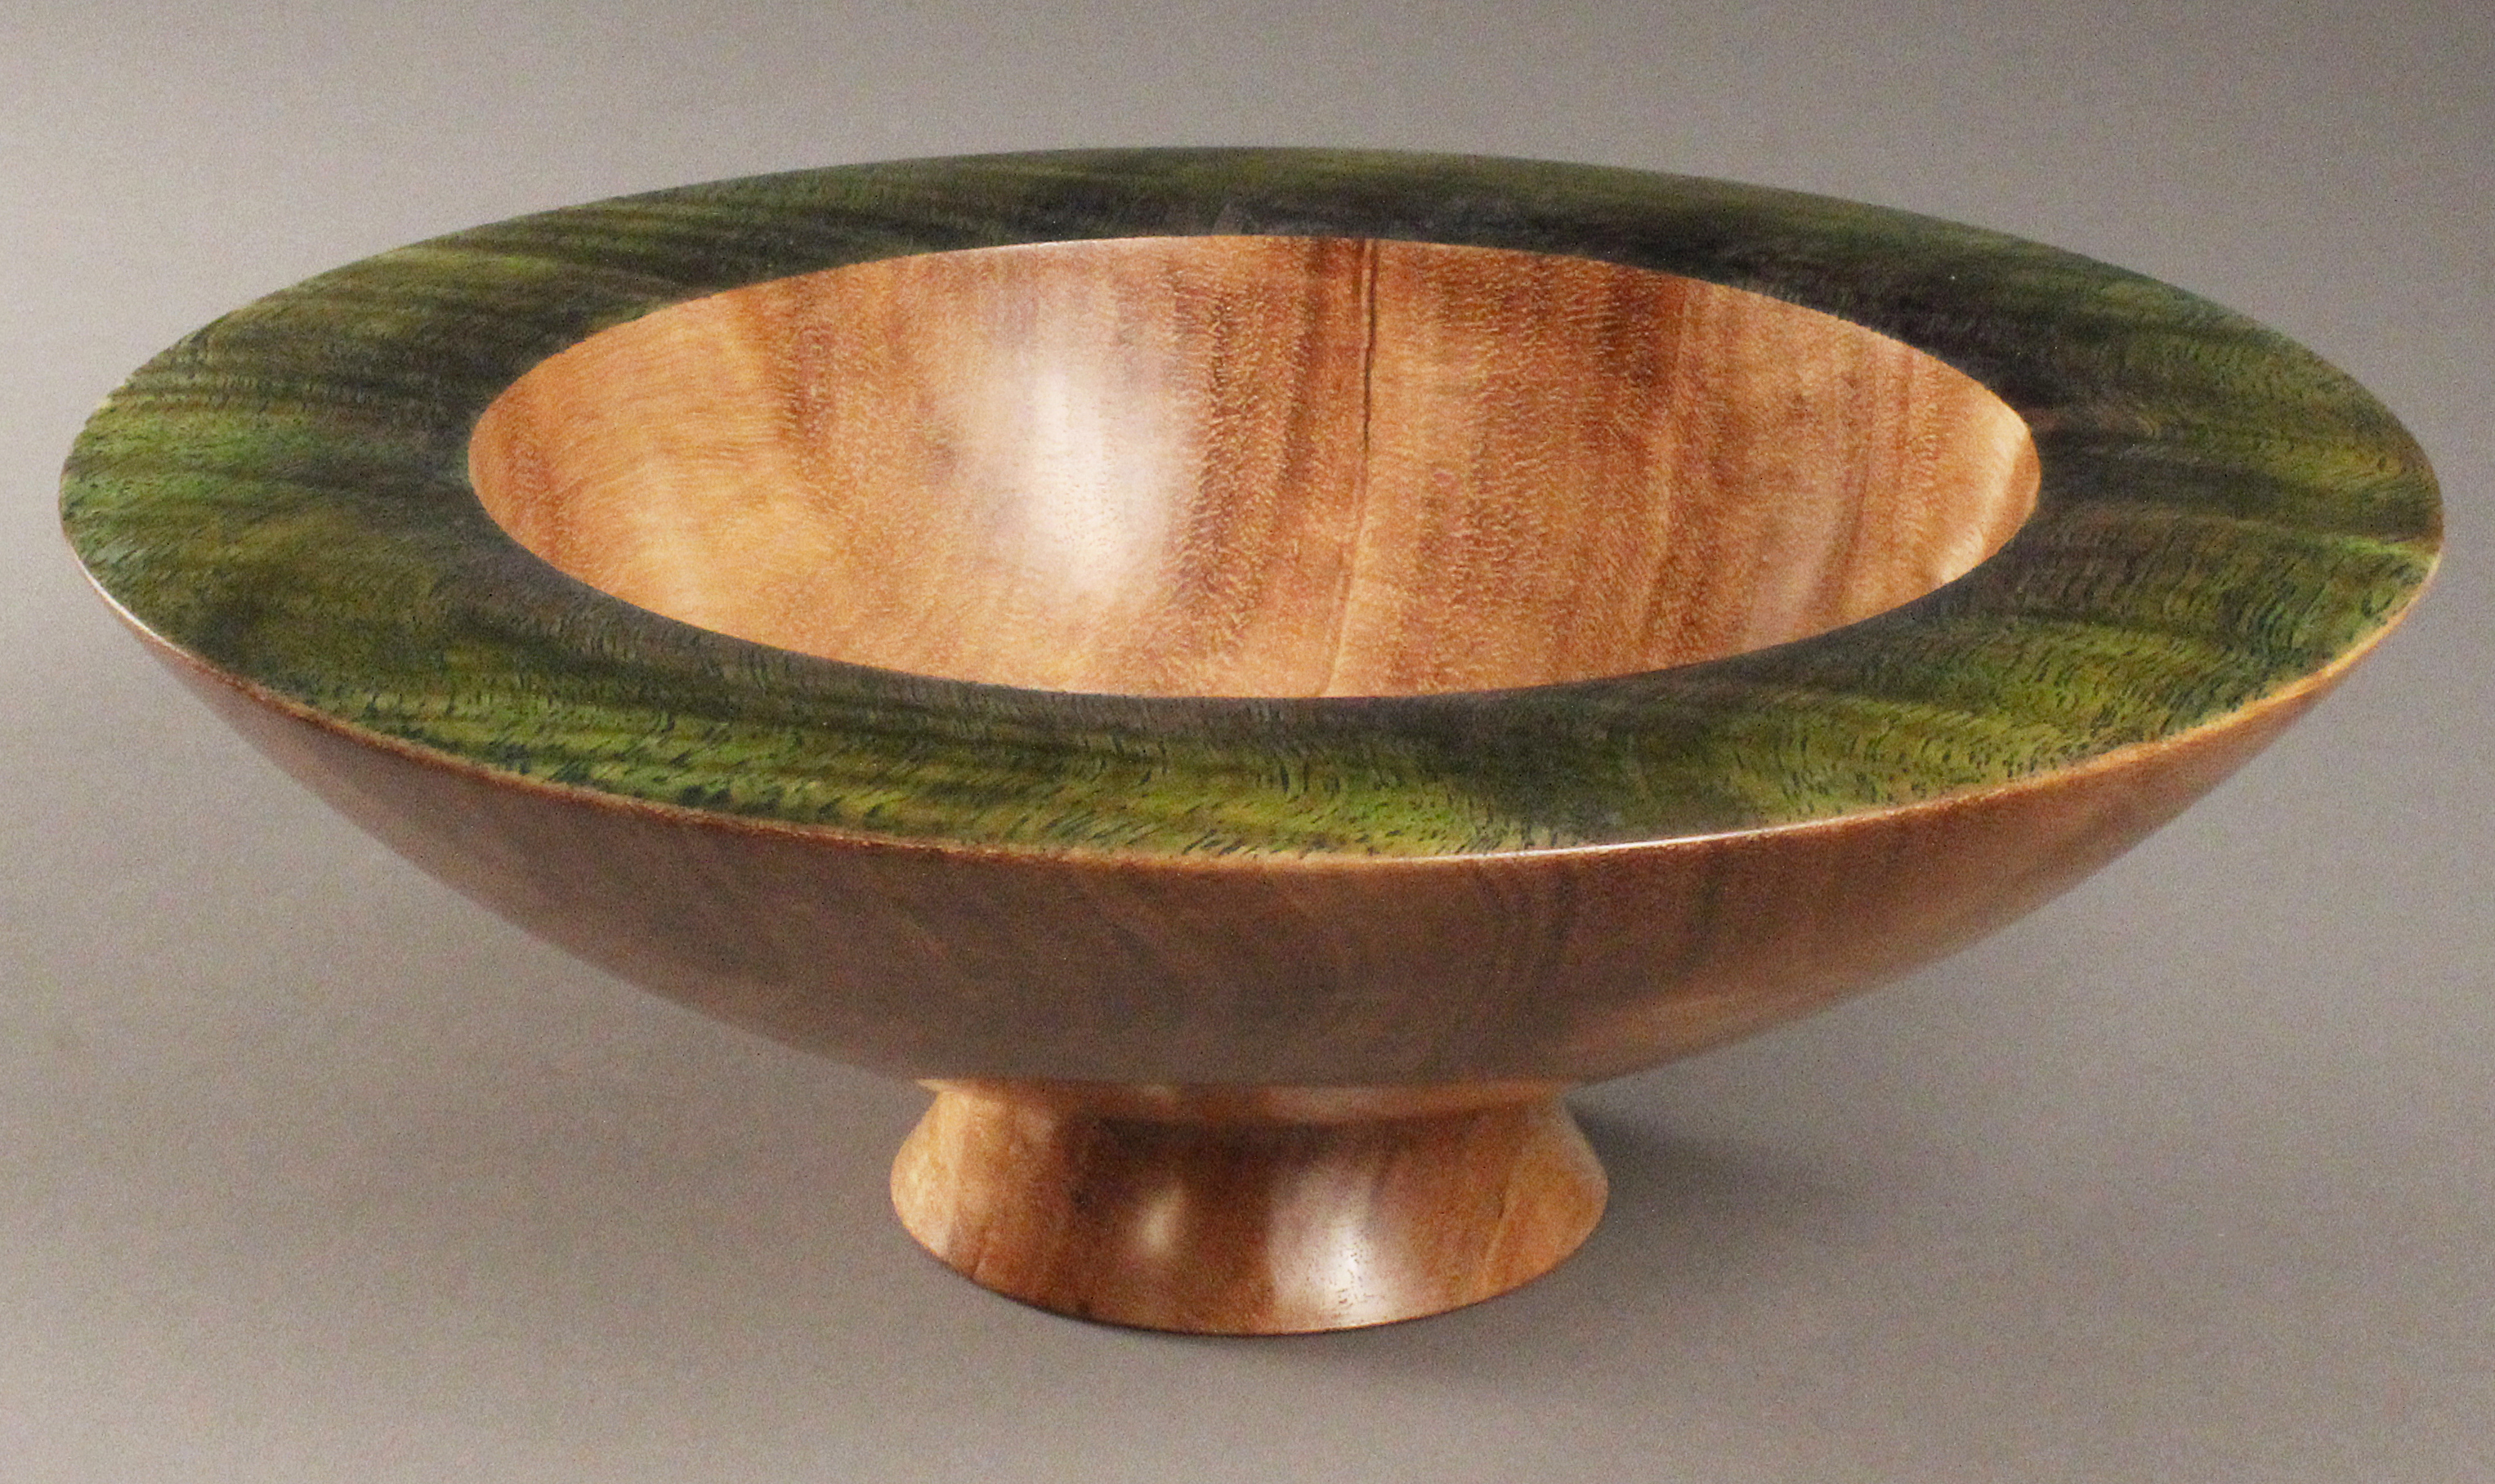 Maple ripple bowl dyed green